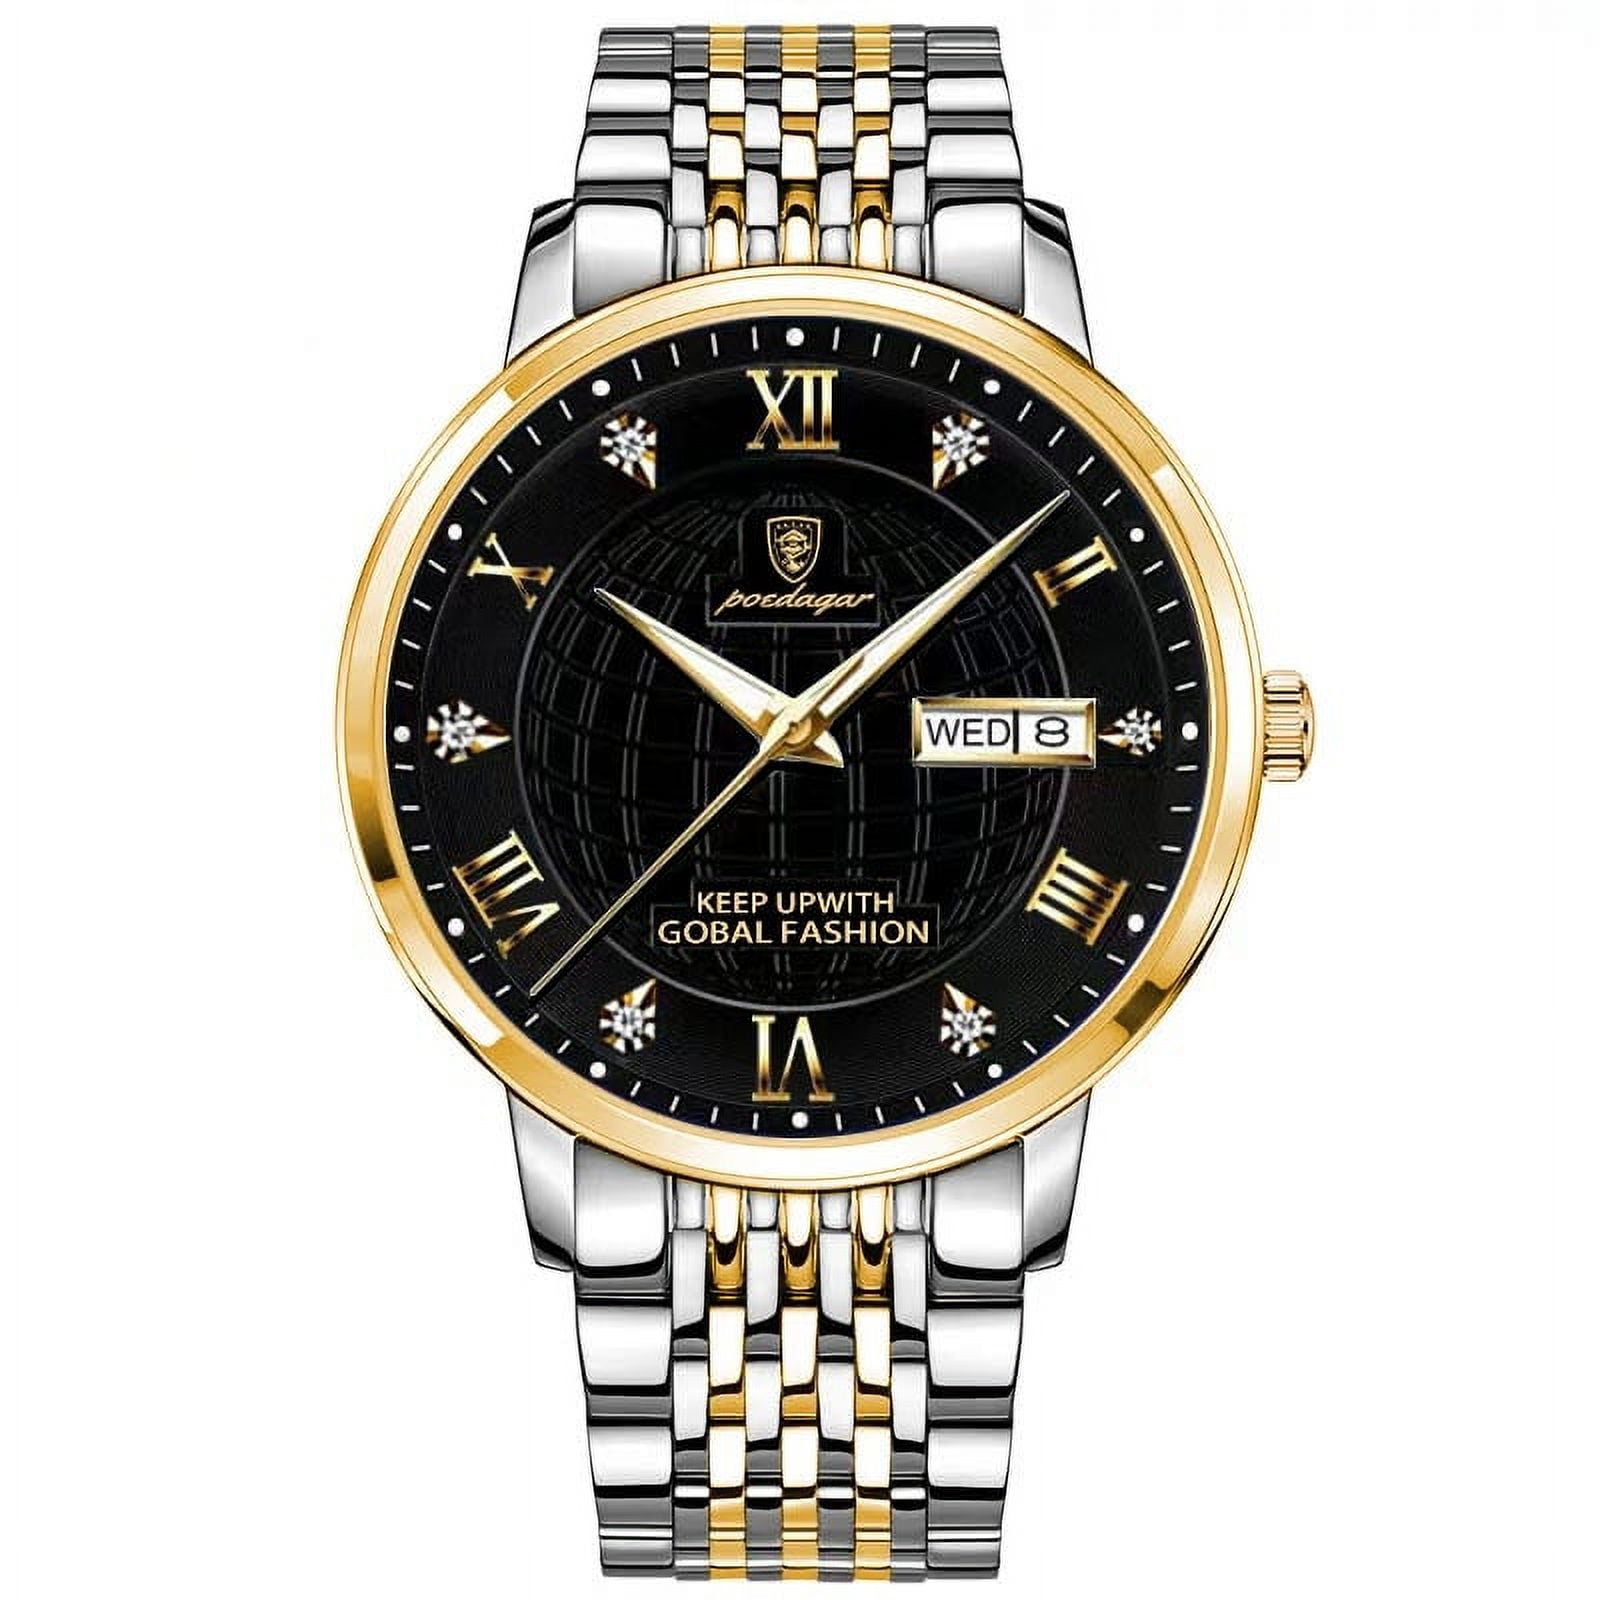 Wrist watches for men  408 Styles for men in stock